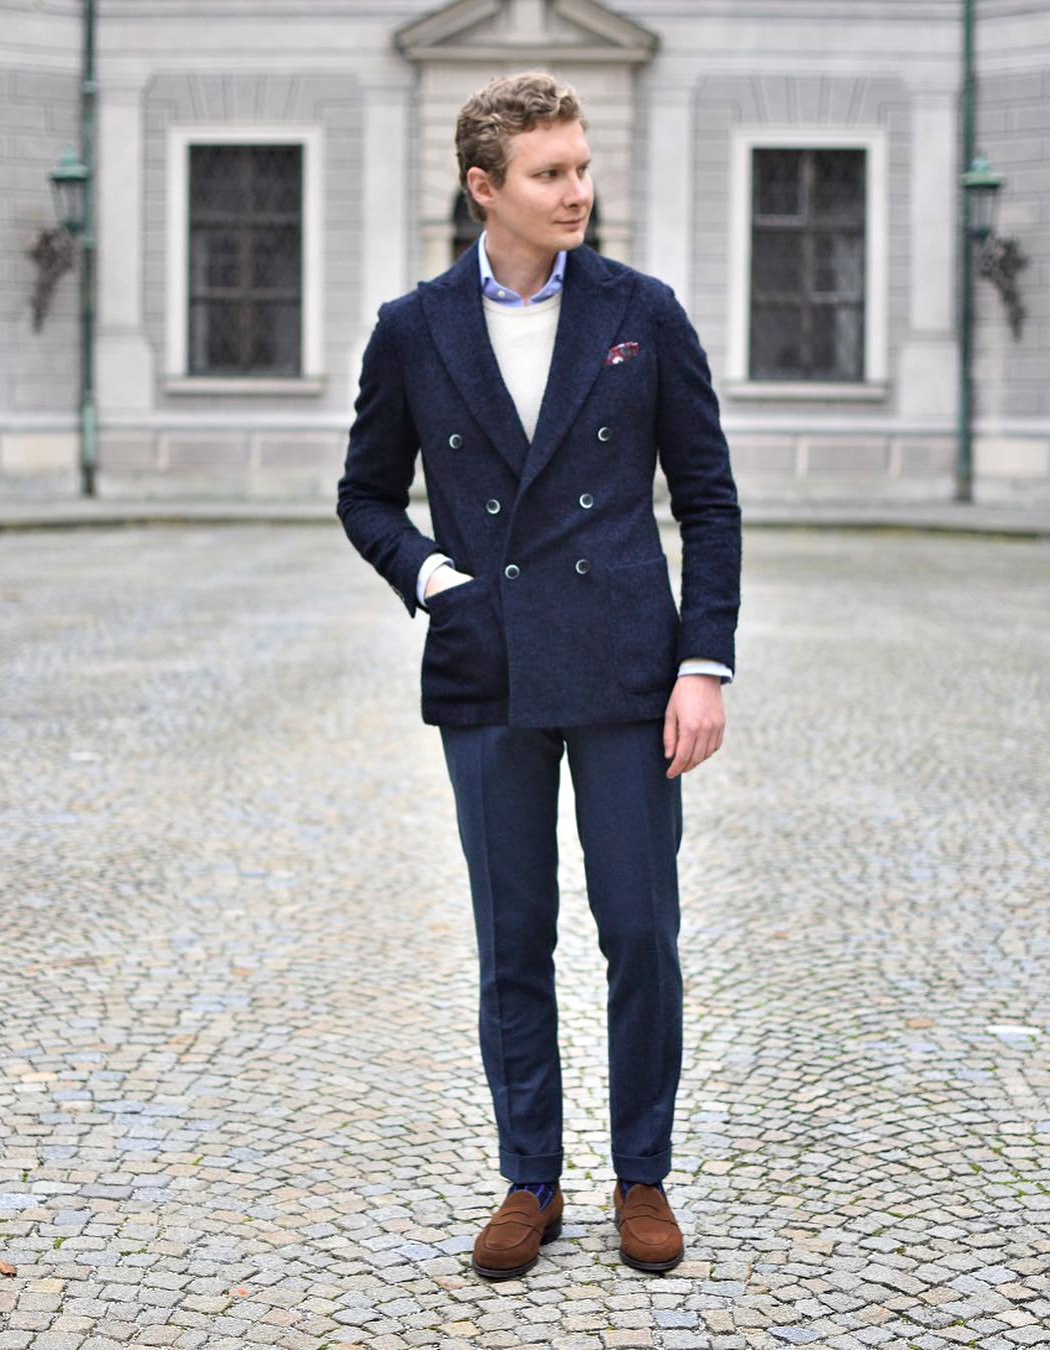 Navy double-breasted wool blazer, navy dress slacks, dress shirt, and brown suede loafers outfit